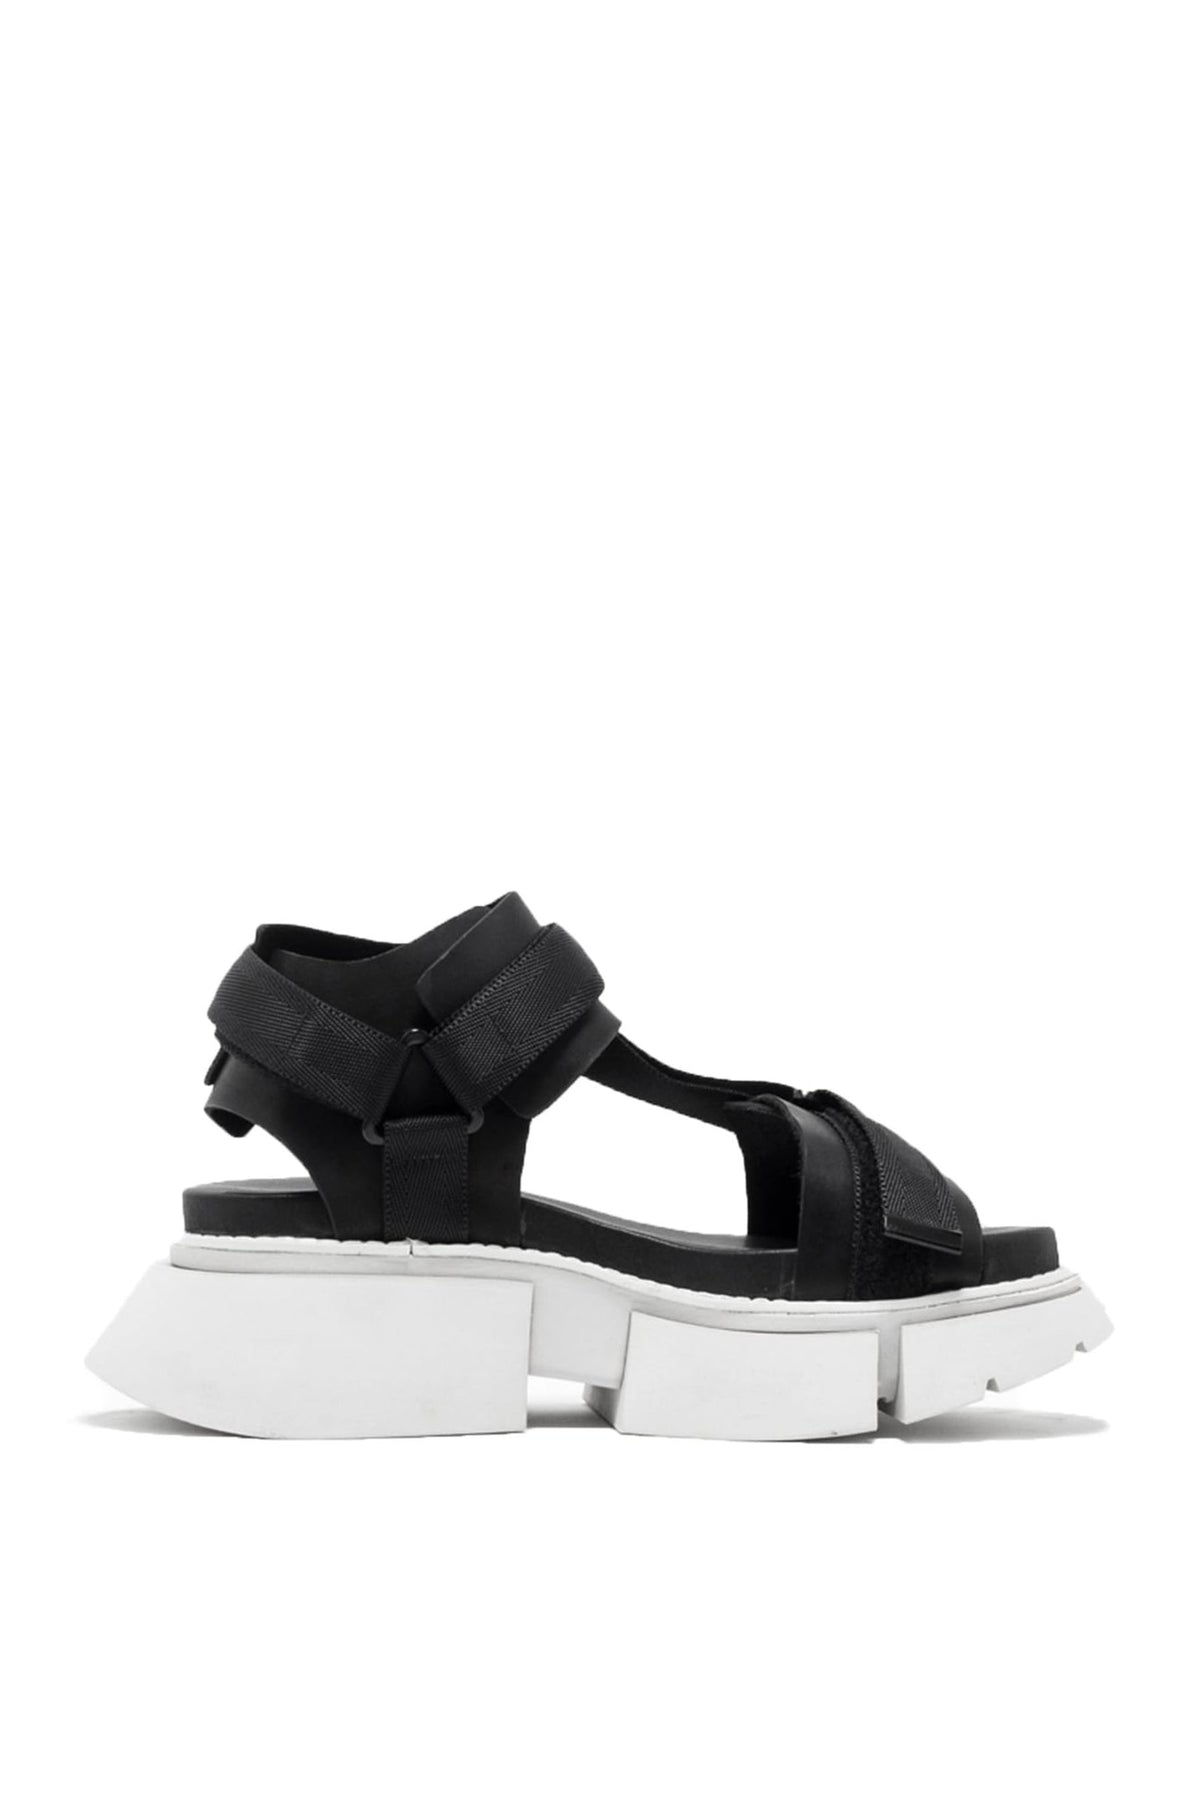 POLY STRAP OVER SANDAL / BLK GRY